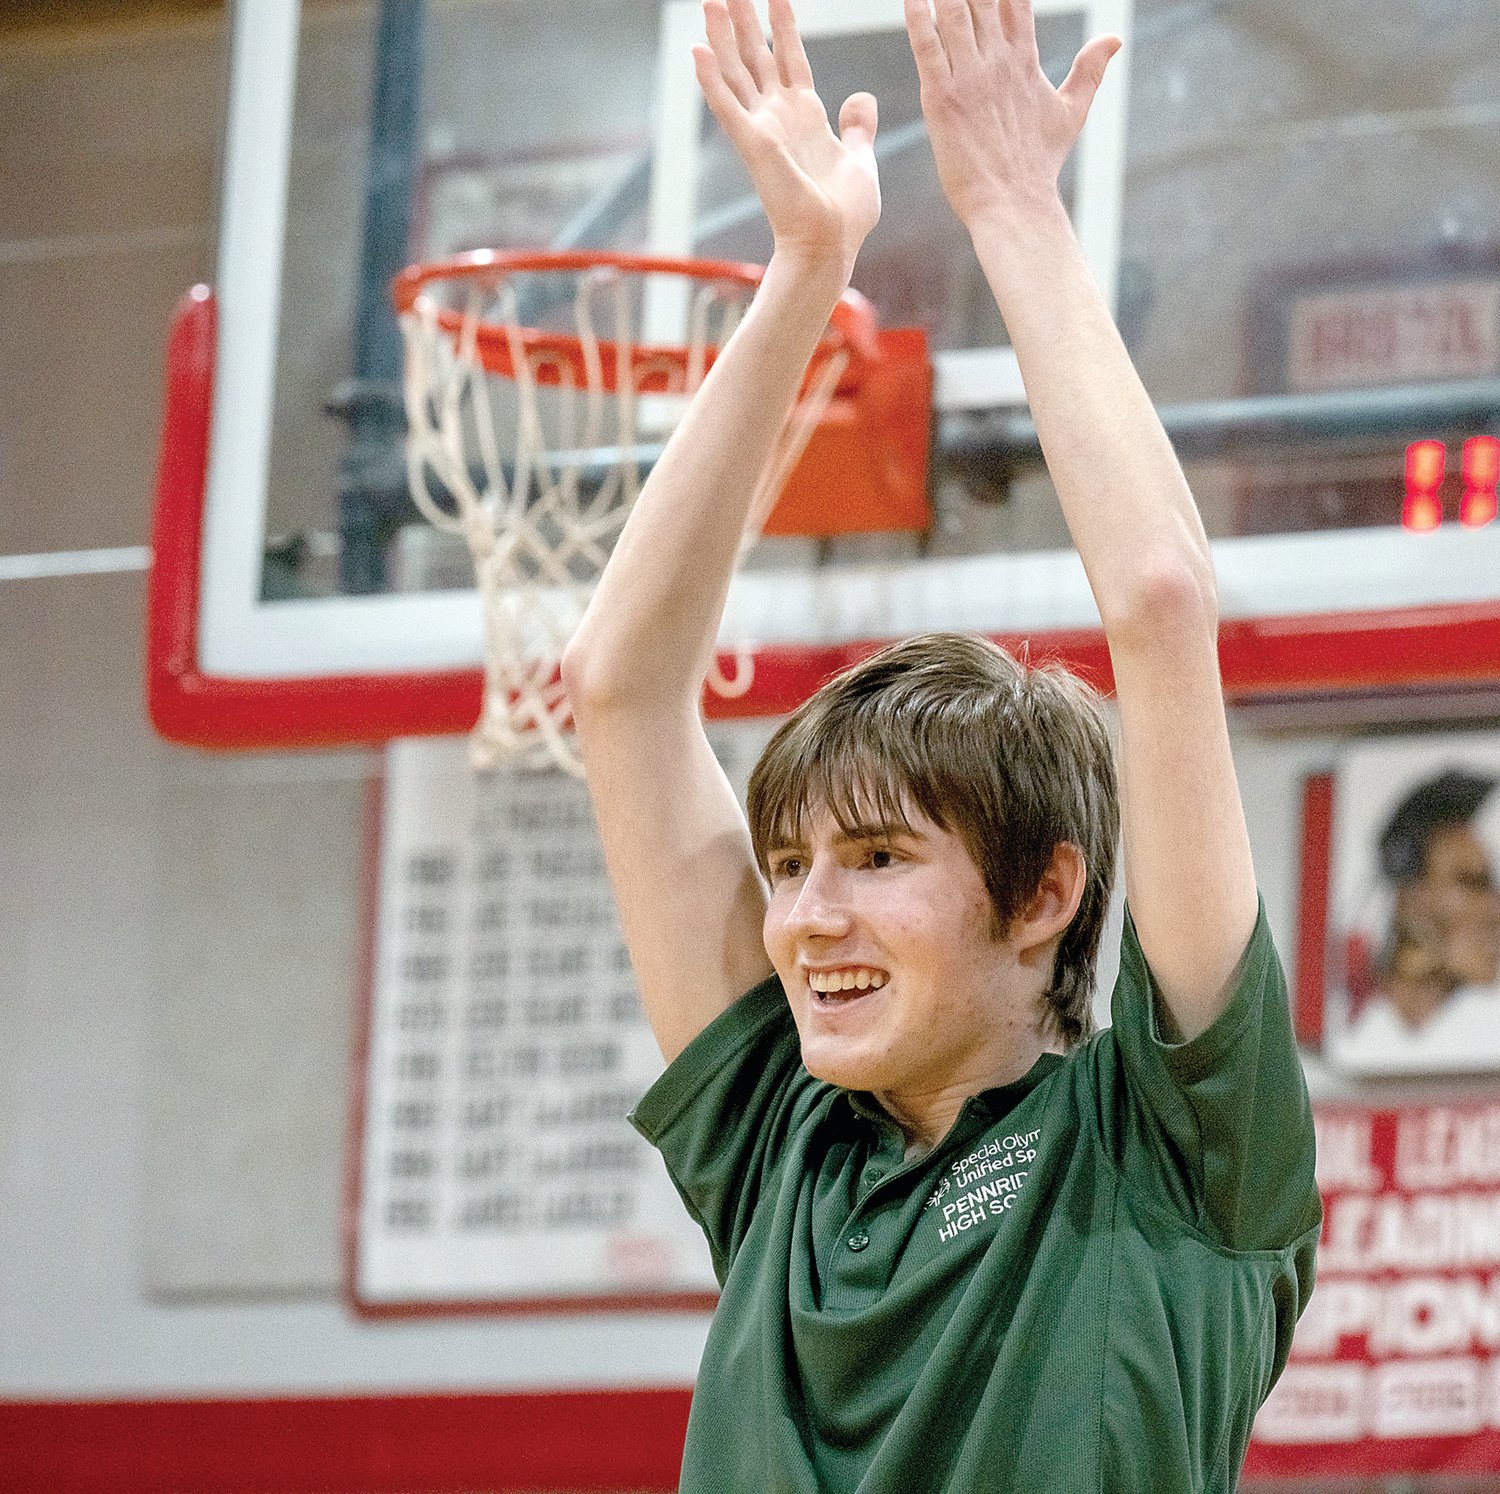 Mason Rolley raises his arms in celebration as Pennridge wins second-place in the Bucks County Unified Bocce Championship, held at Bristol High School March 3.